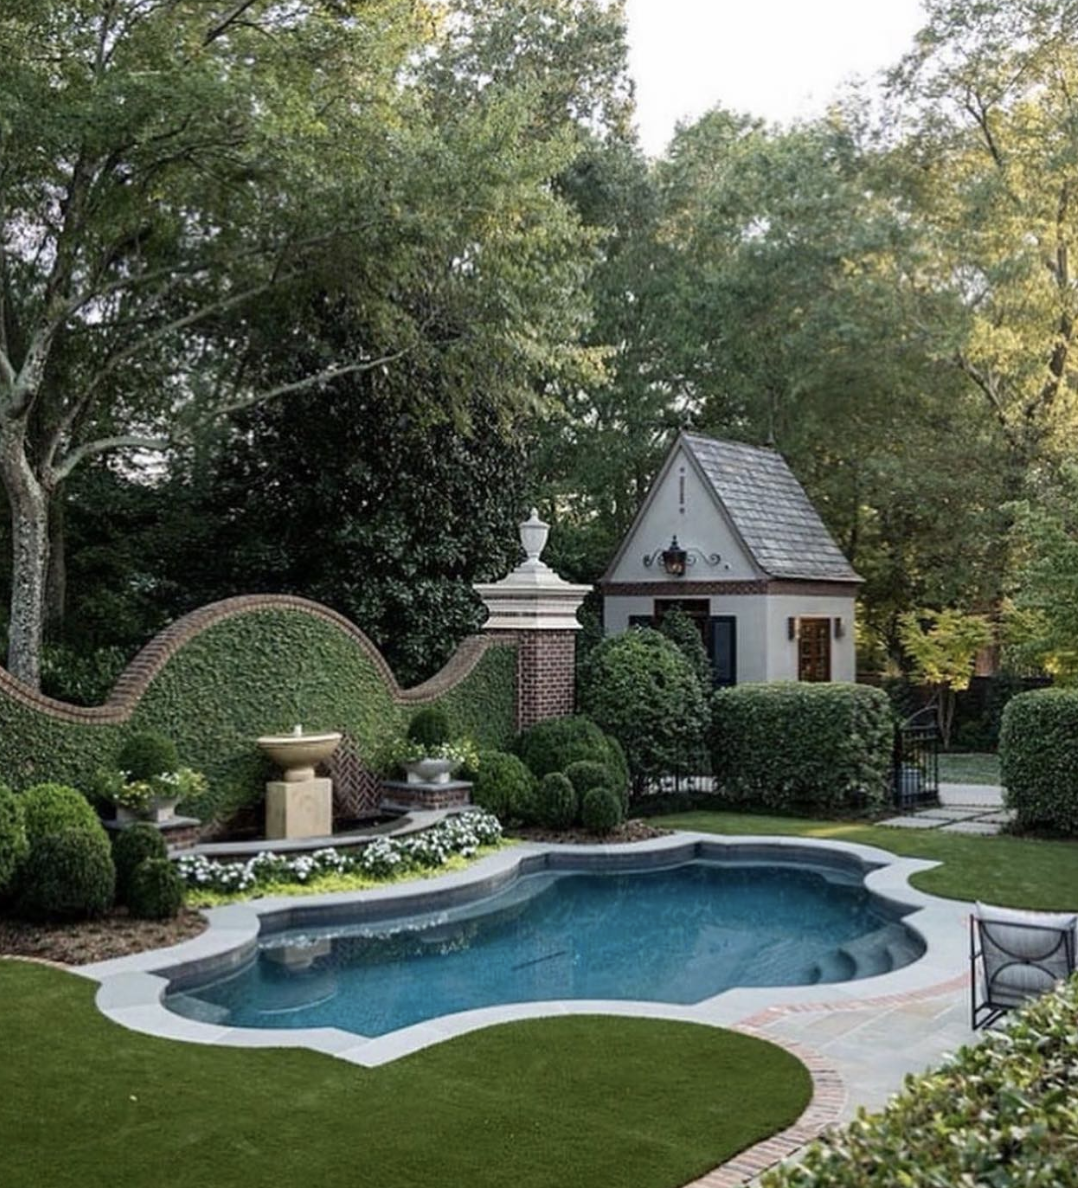 Everything You Need to Know About Adding a Pool To Your Backyard: Whether you're thinking about adding a pool to your backyard or just curious about what it takes to maintain one, you'll want to keep reading!